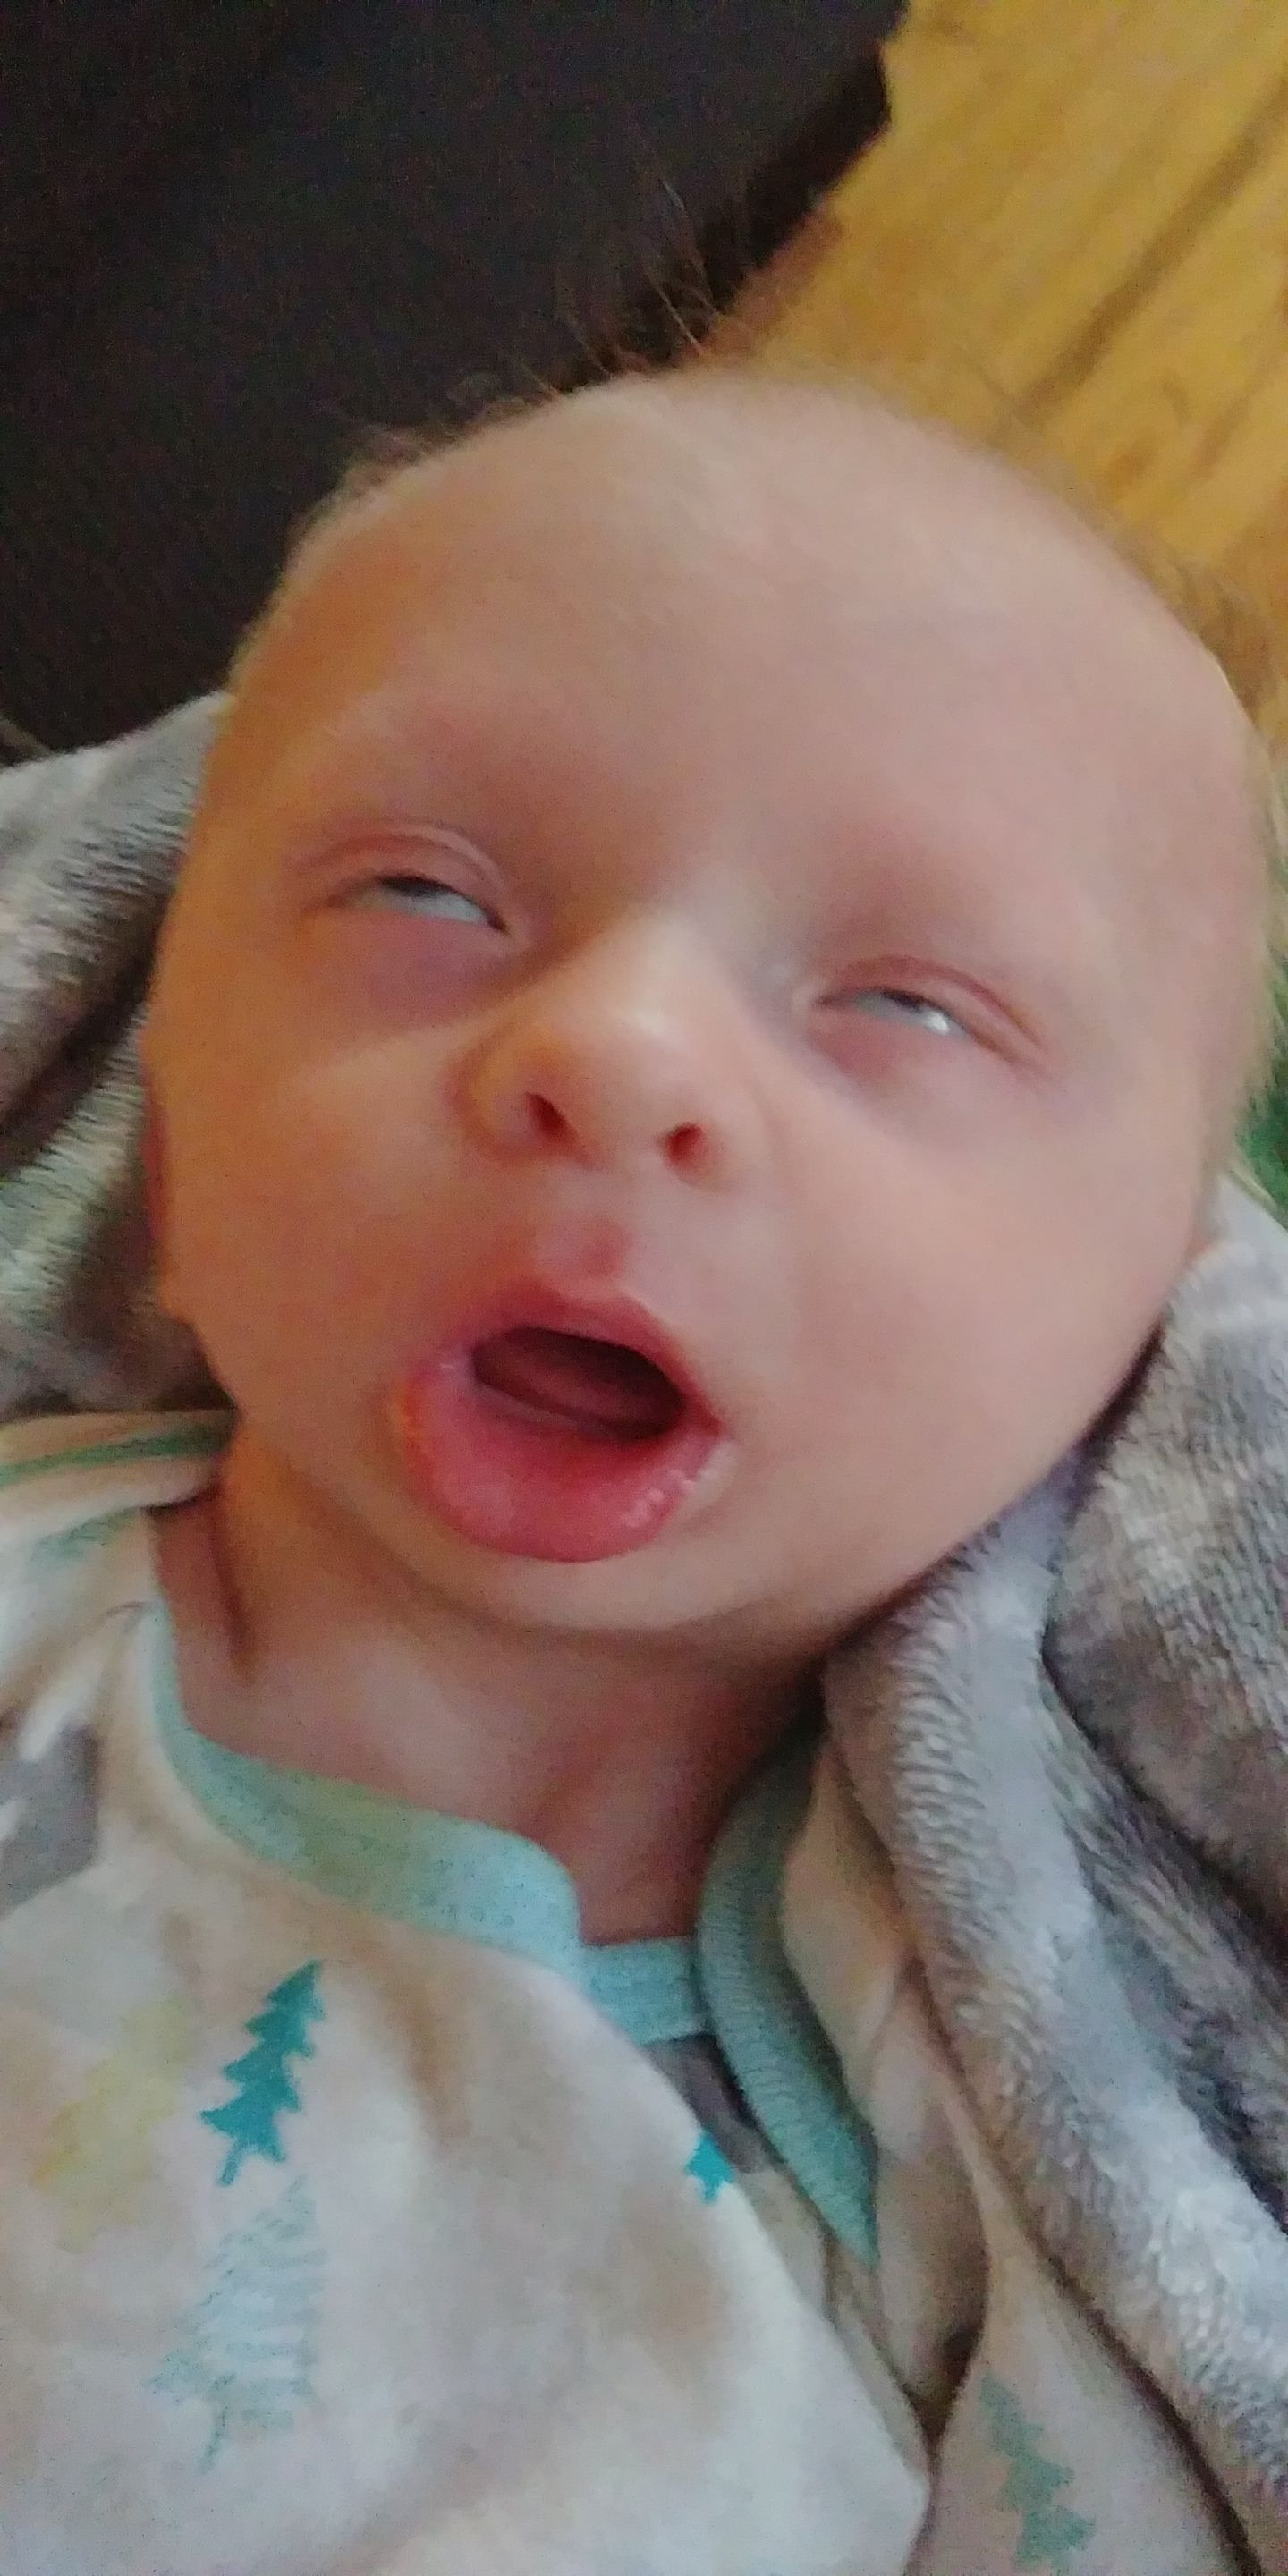 My son is basically a potato with hands and doesn't smile yet, but he does do this...